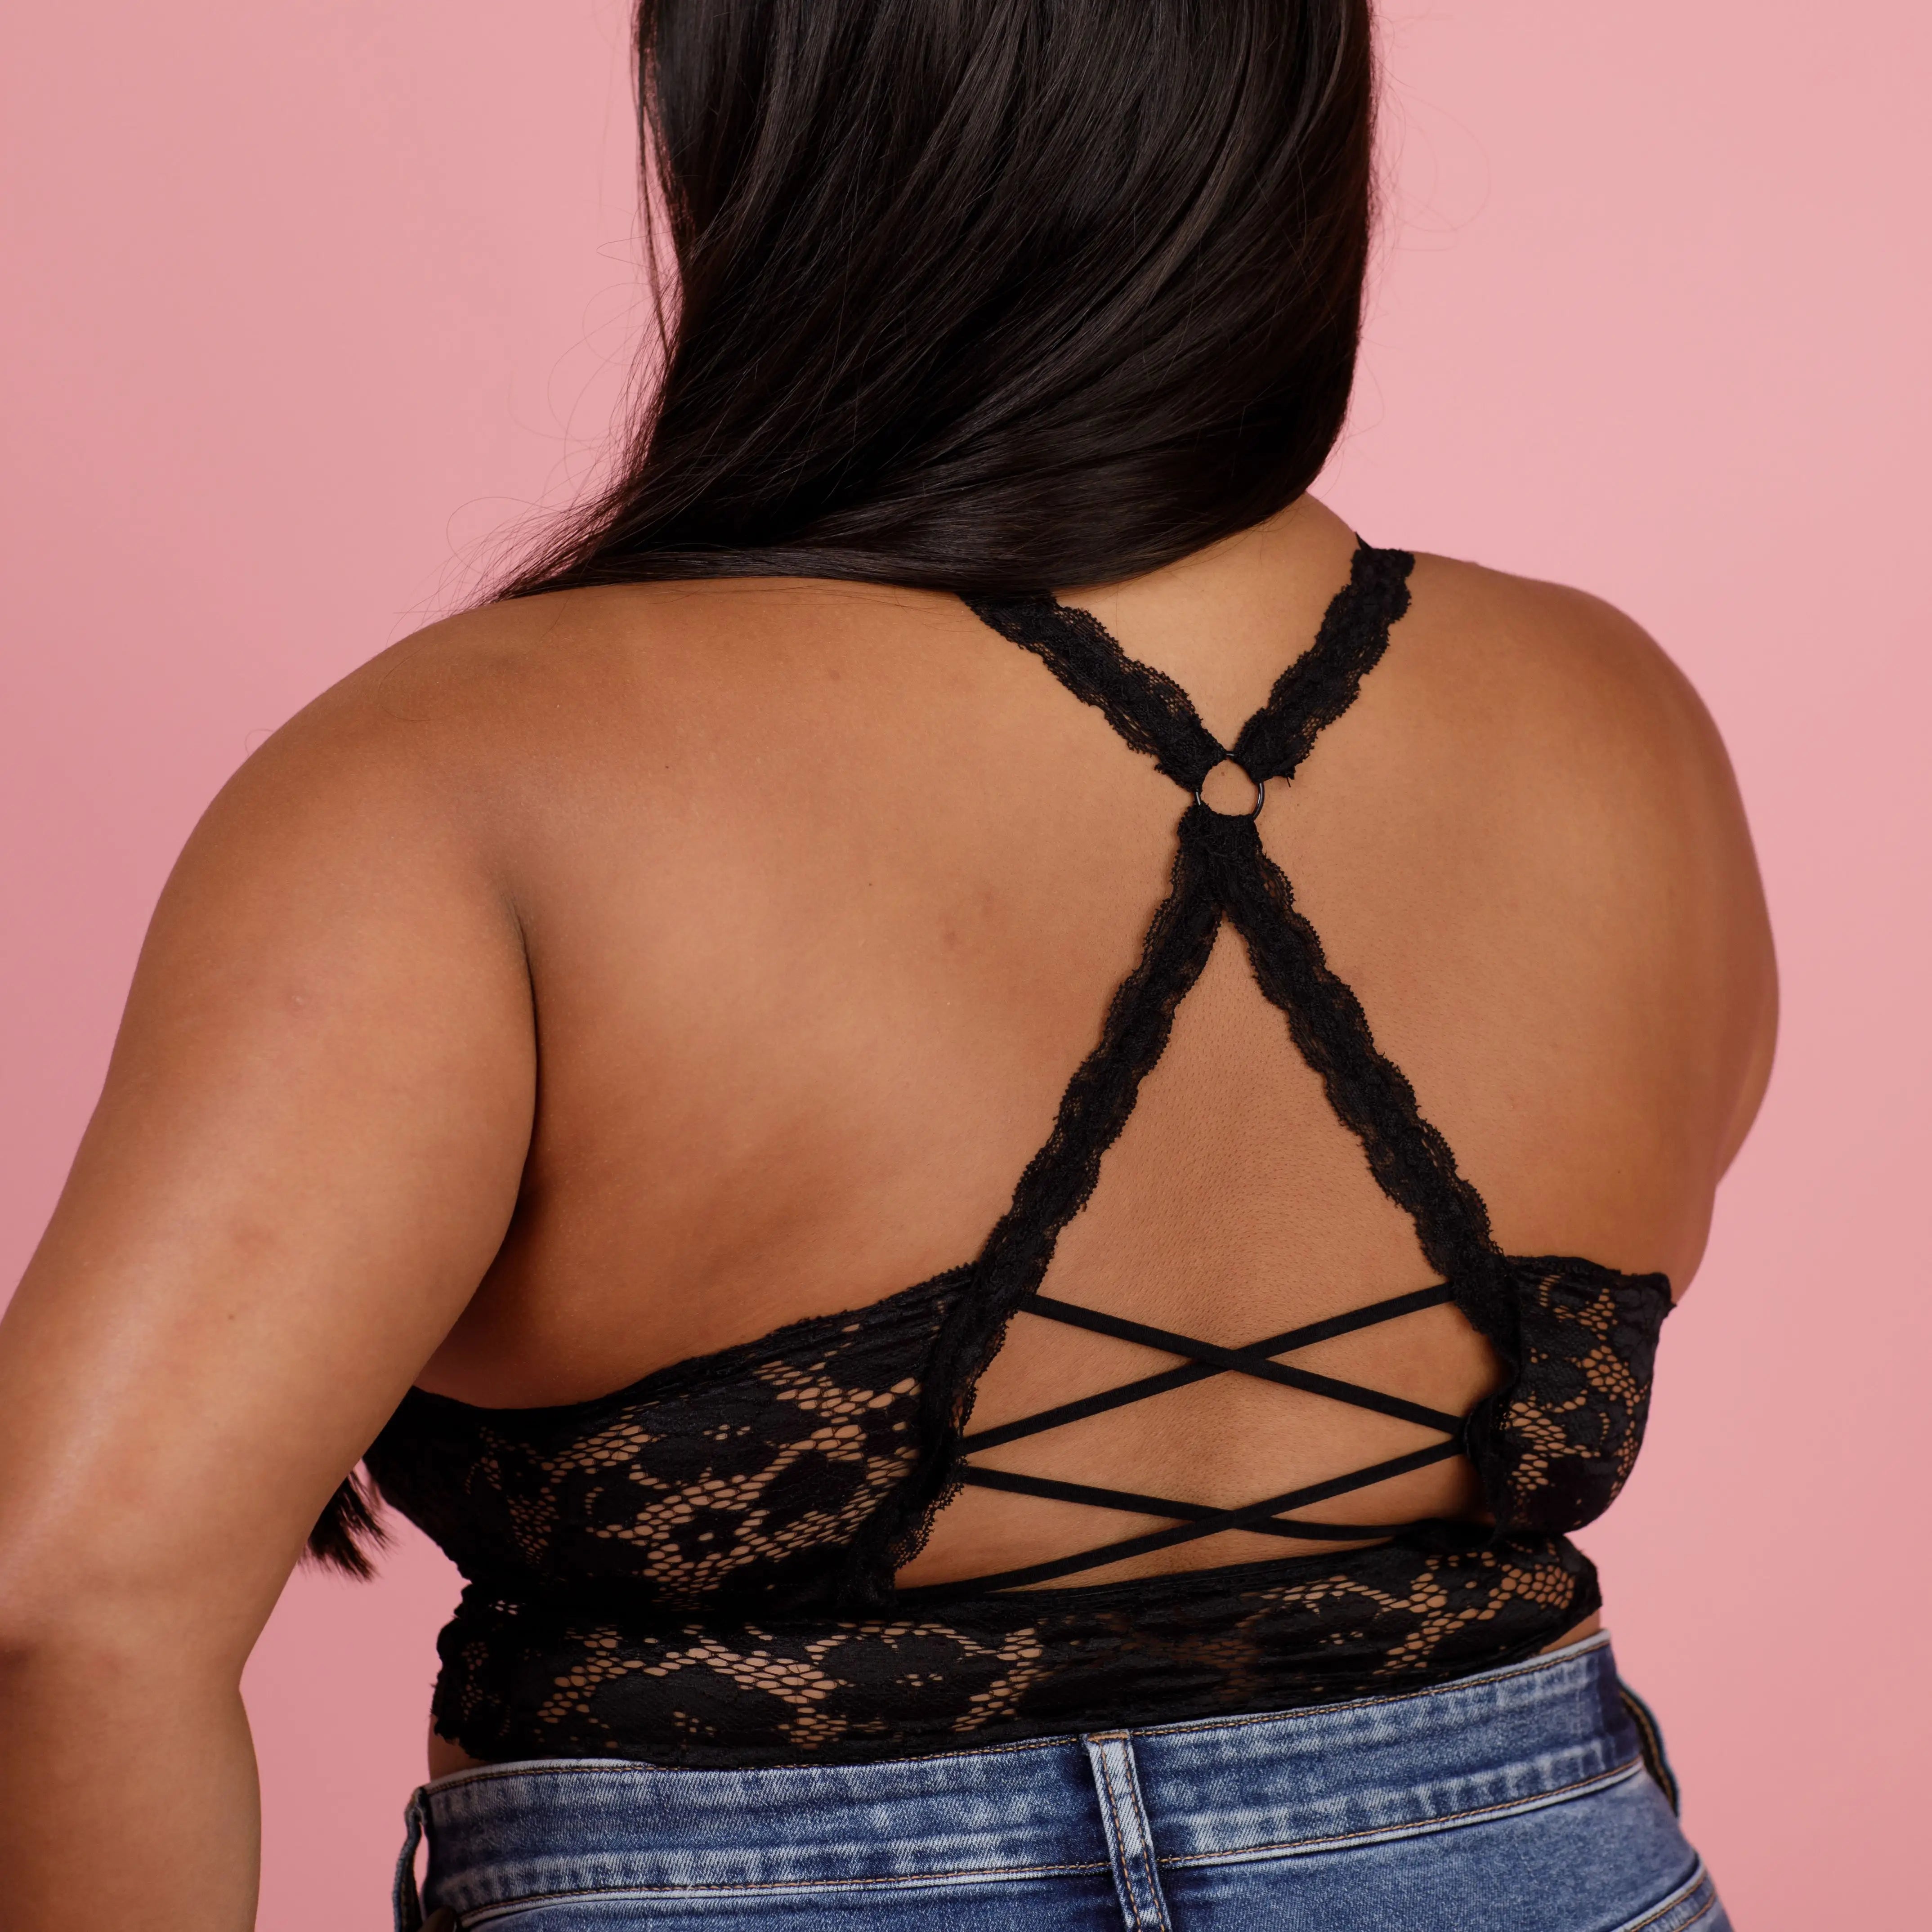 Juliette Deluxe Lace Bralette - Black - Angie's Strength & Style